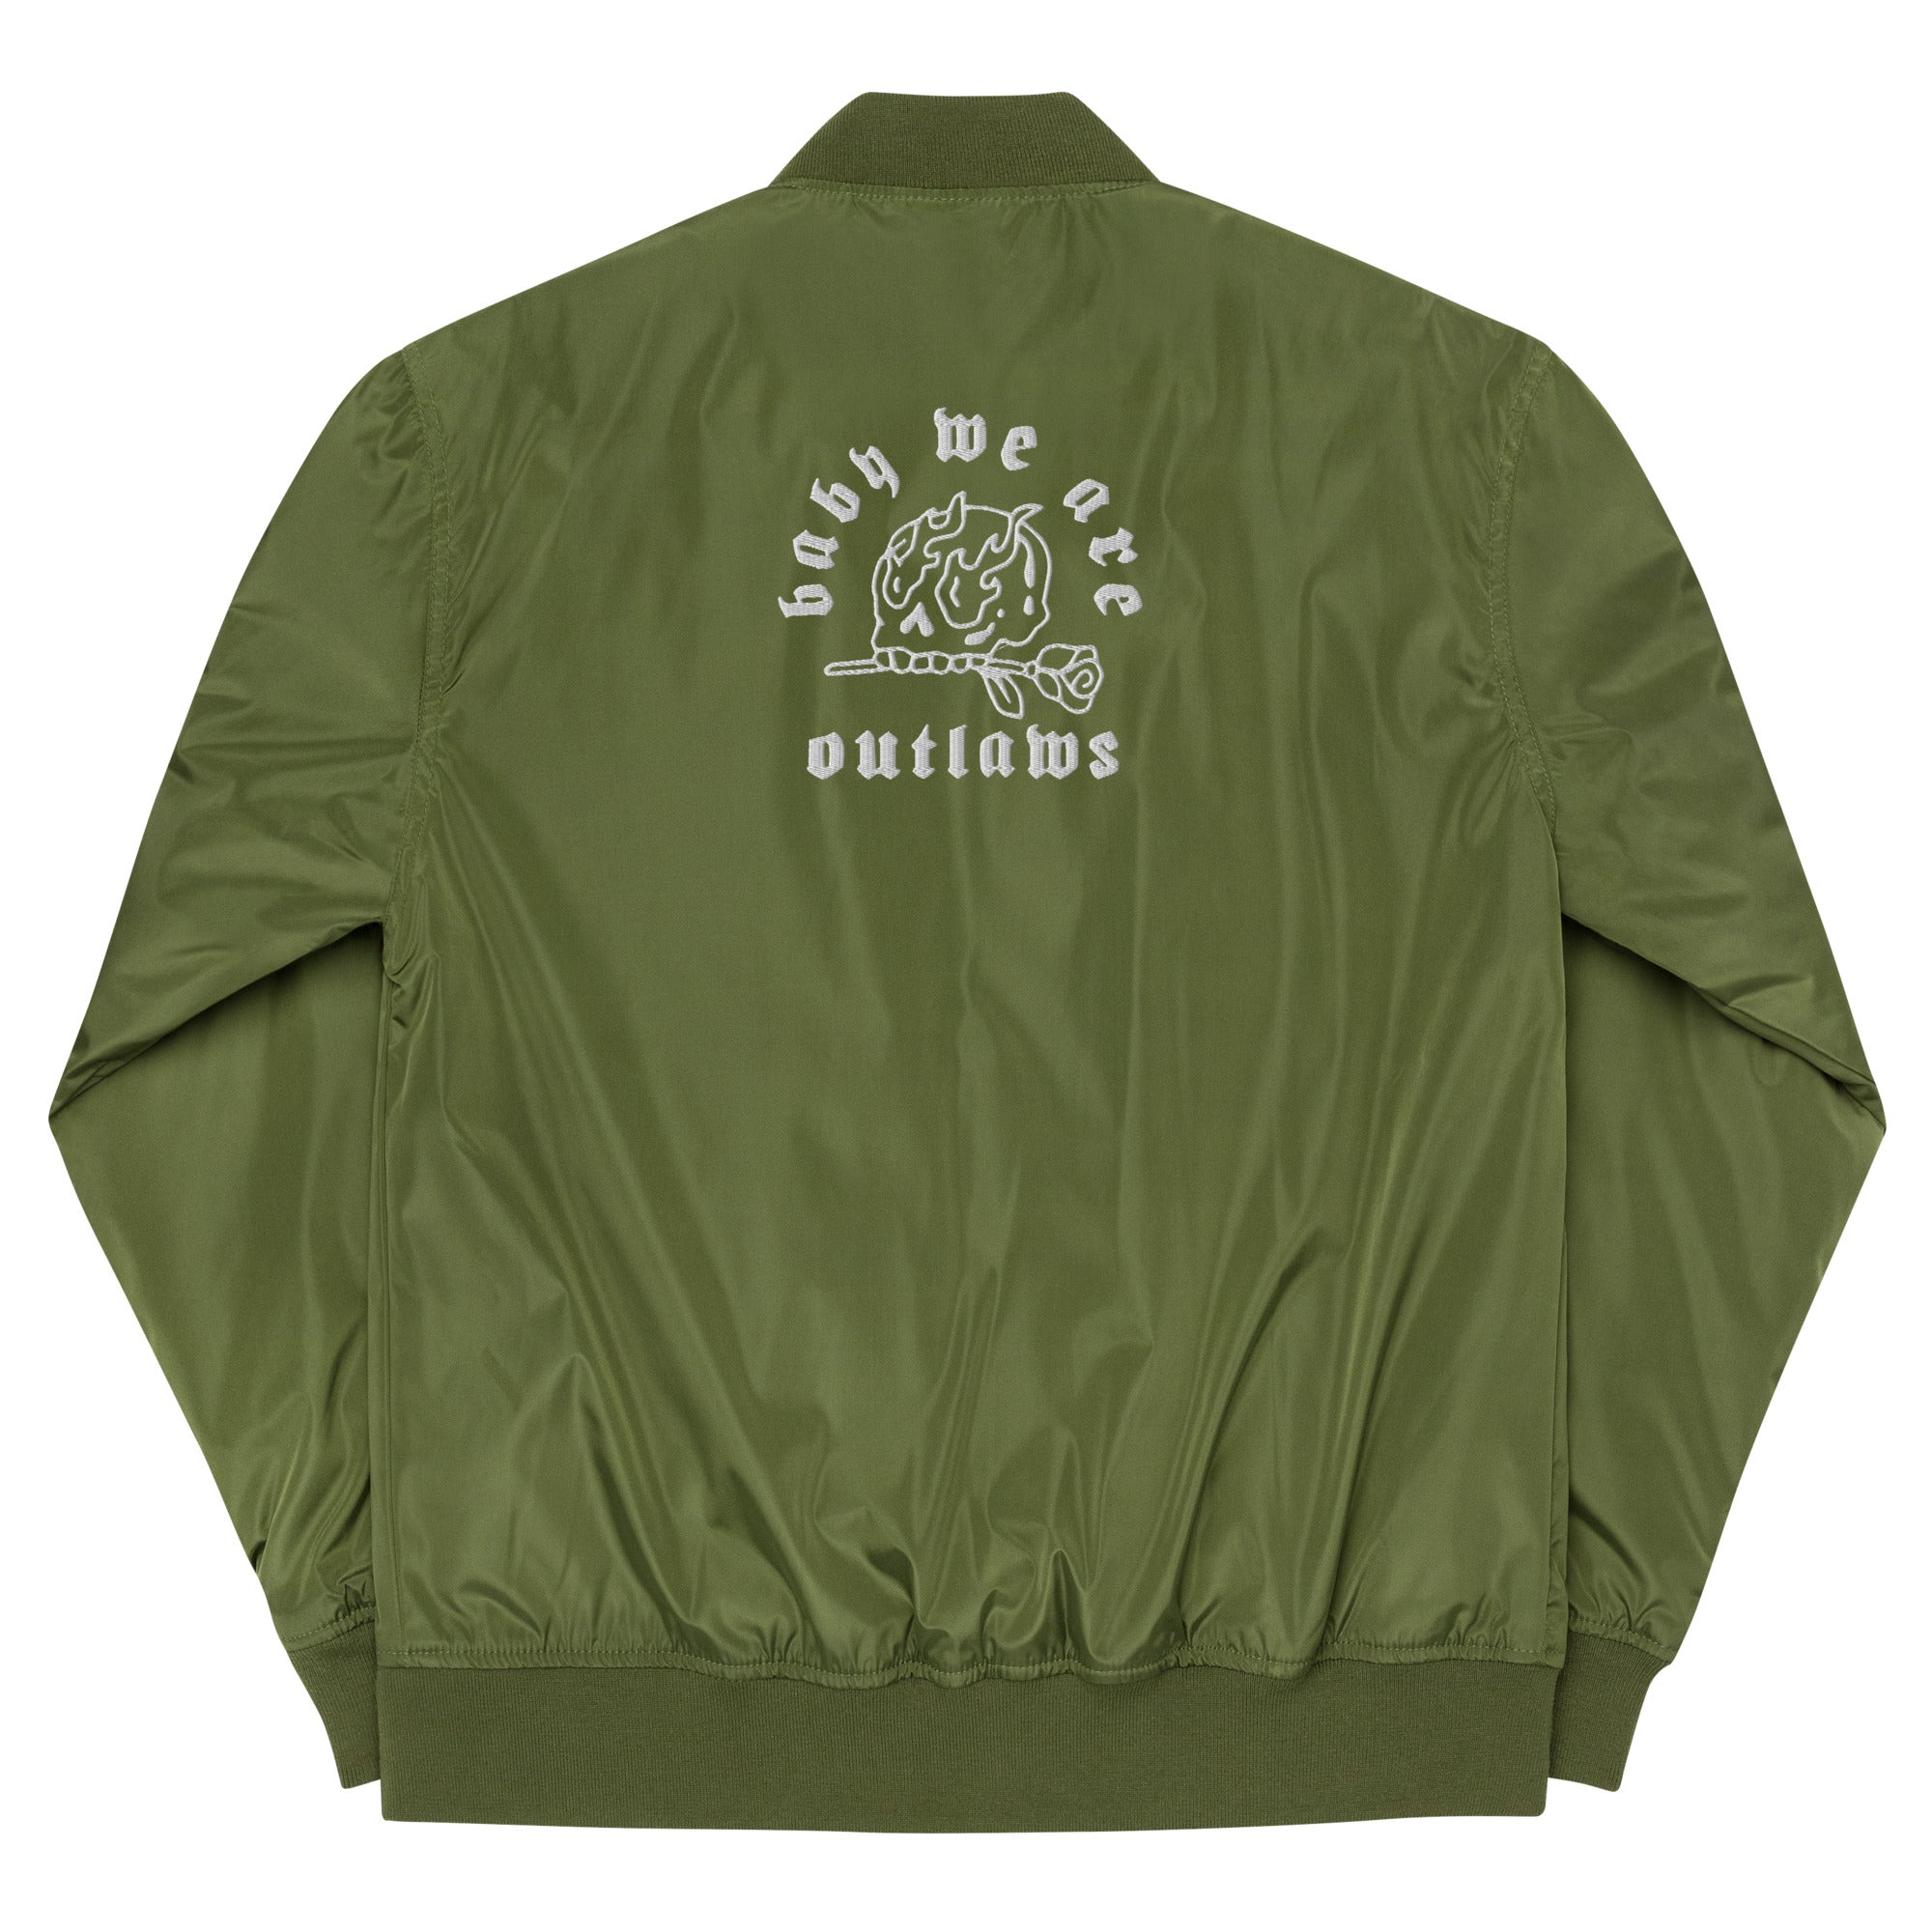 Outlaws Premium recycled bomber jacket